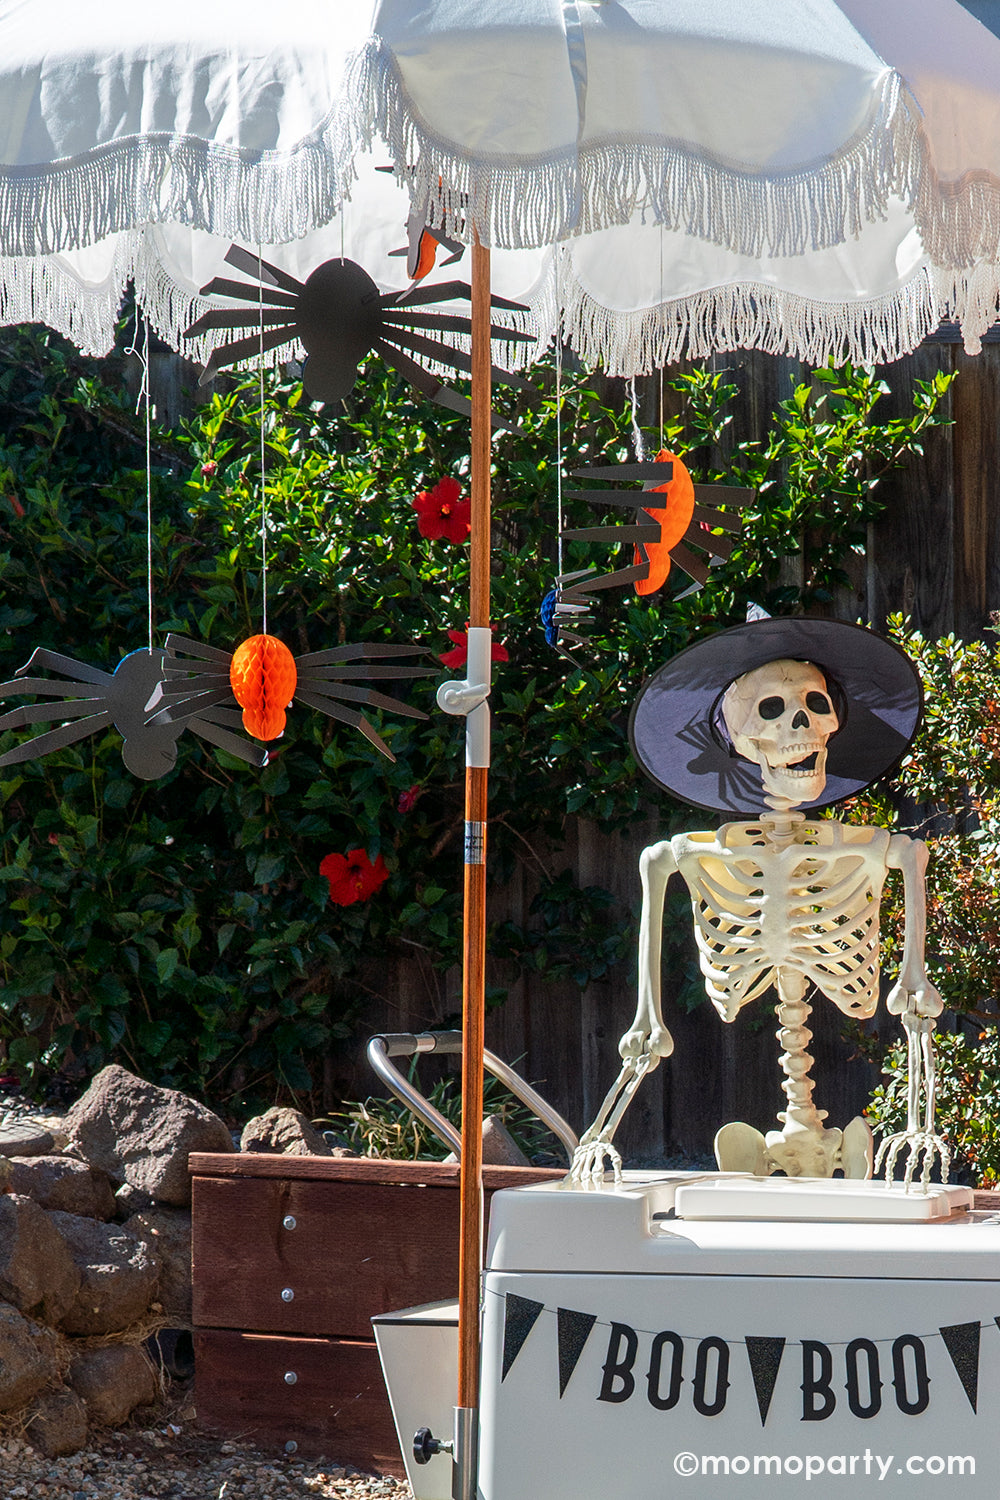 A spooky fun Halloween party set up with a paleta cart decorated with My mind's Eye Vintage Halloween Boo banner with Meri Meri's honeycombs in three different colors of orange, navy and mint greenhung from the boho themed umbrella, standing next to the paleta cart was a full sized posable skeleton wearing a witch hat, creating a spooky vibe for a Halloween celebration.